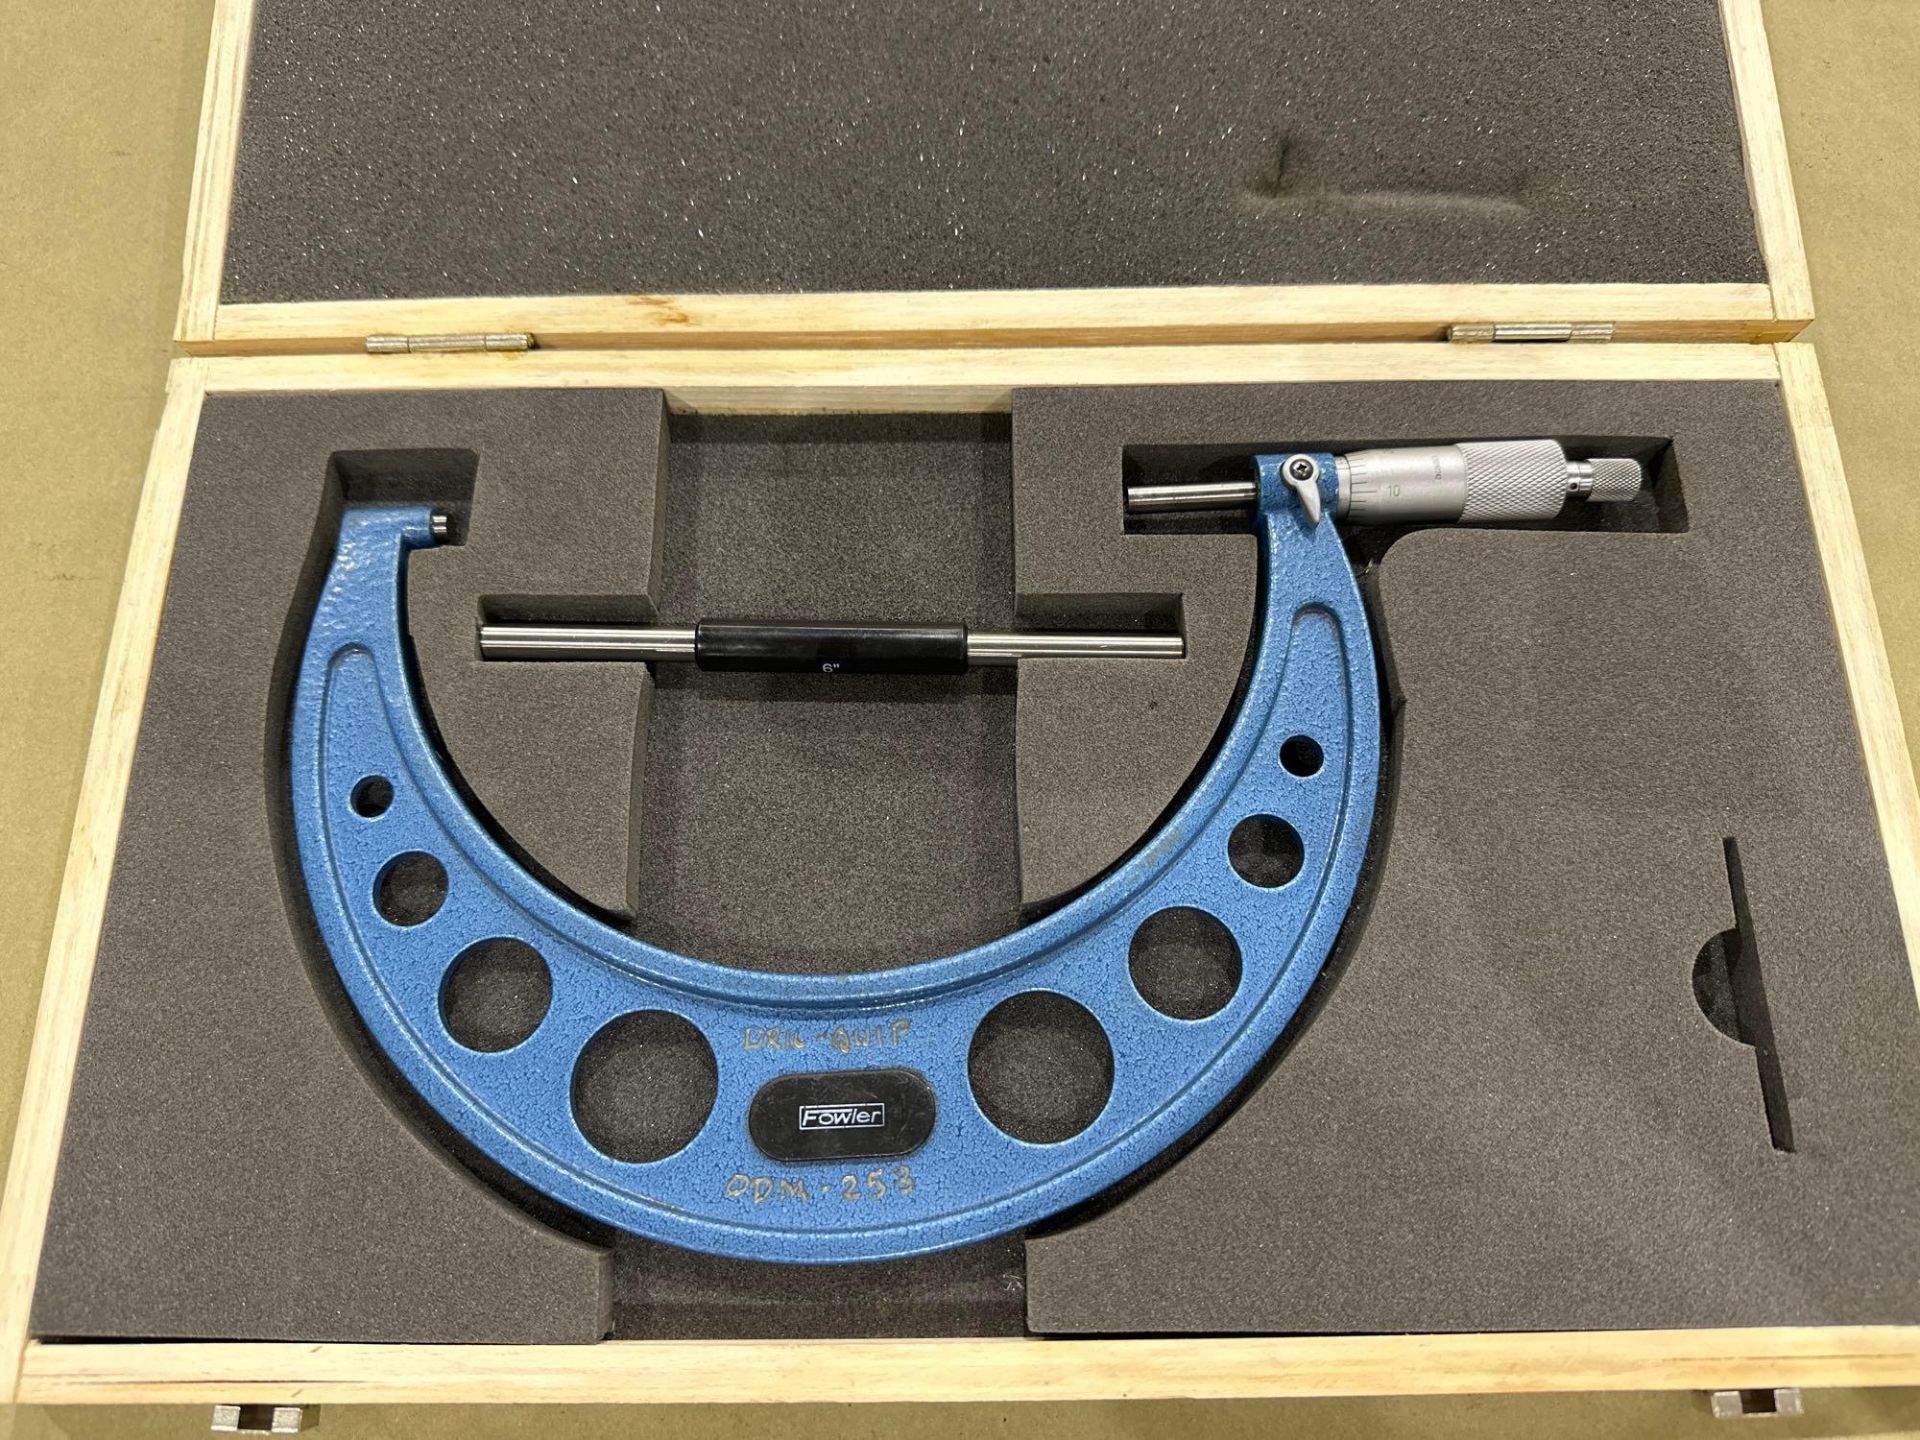 Fowler OD Micrometer No 52-240 Series, 6–7” Range, 0.0001” Graduation in wood case. See photo.